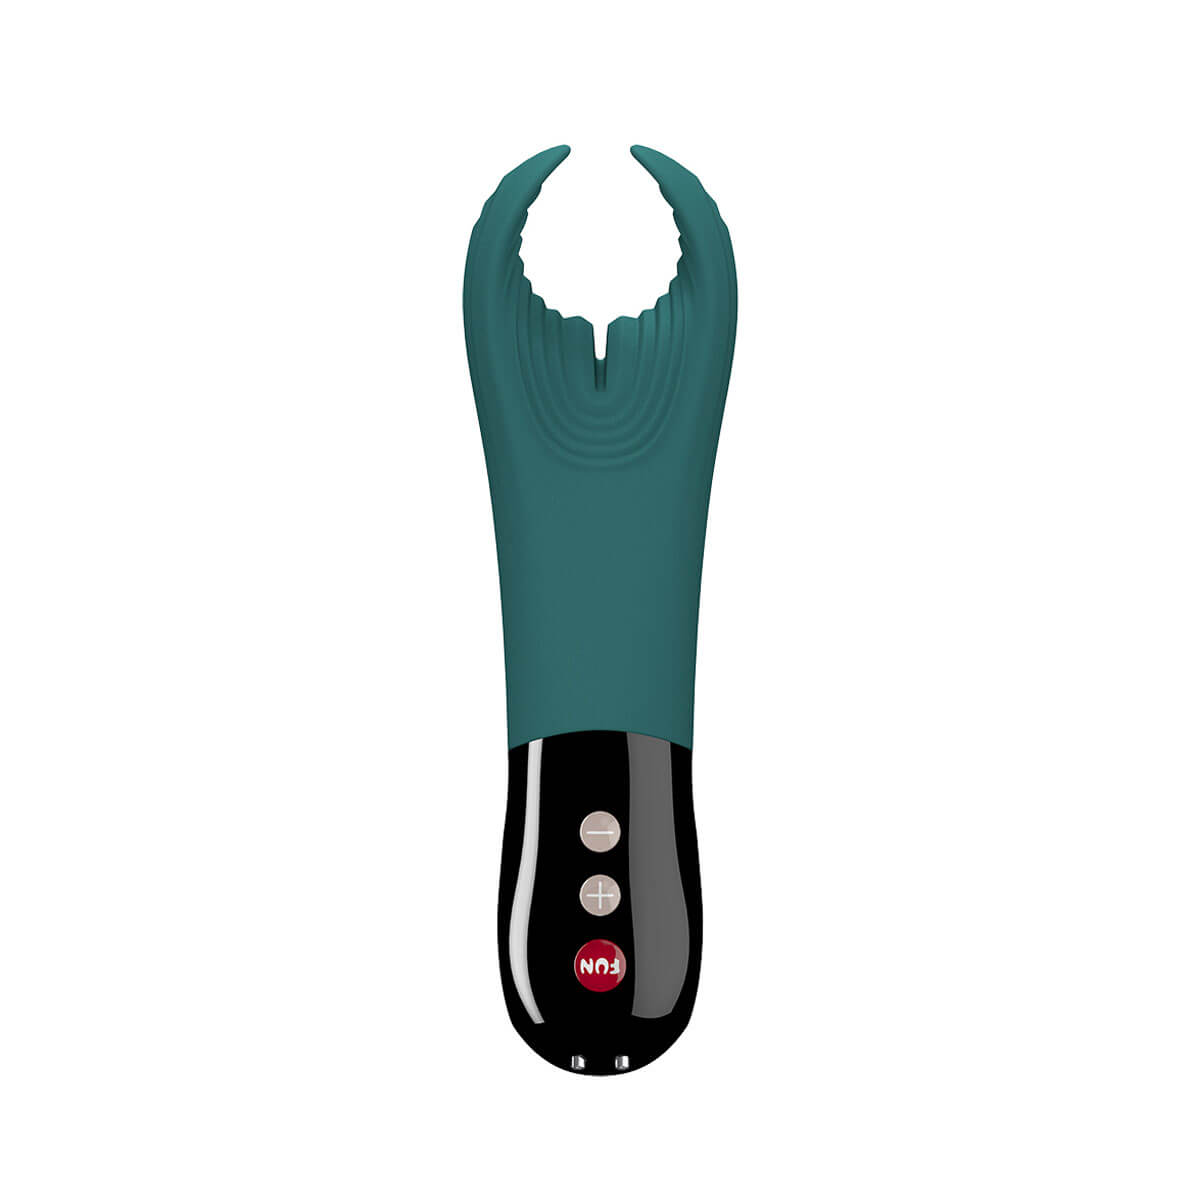 Blue-coloured silicone penis vibrator by Fun Factory with black ABS handle and three buttons Nudie Co